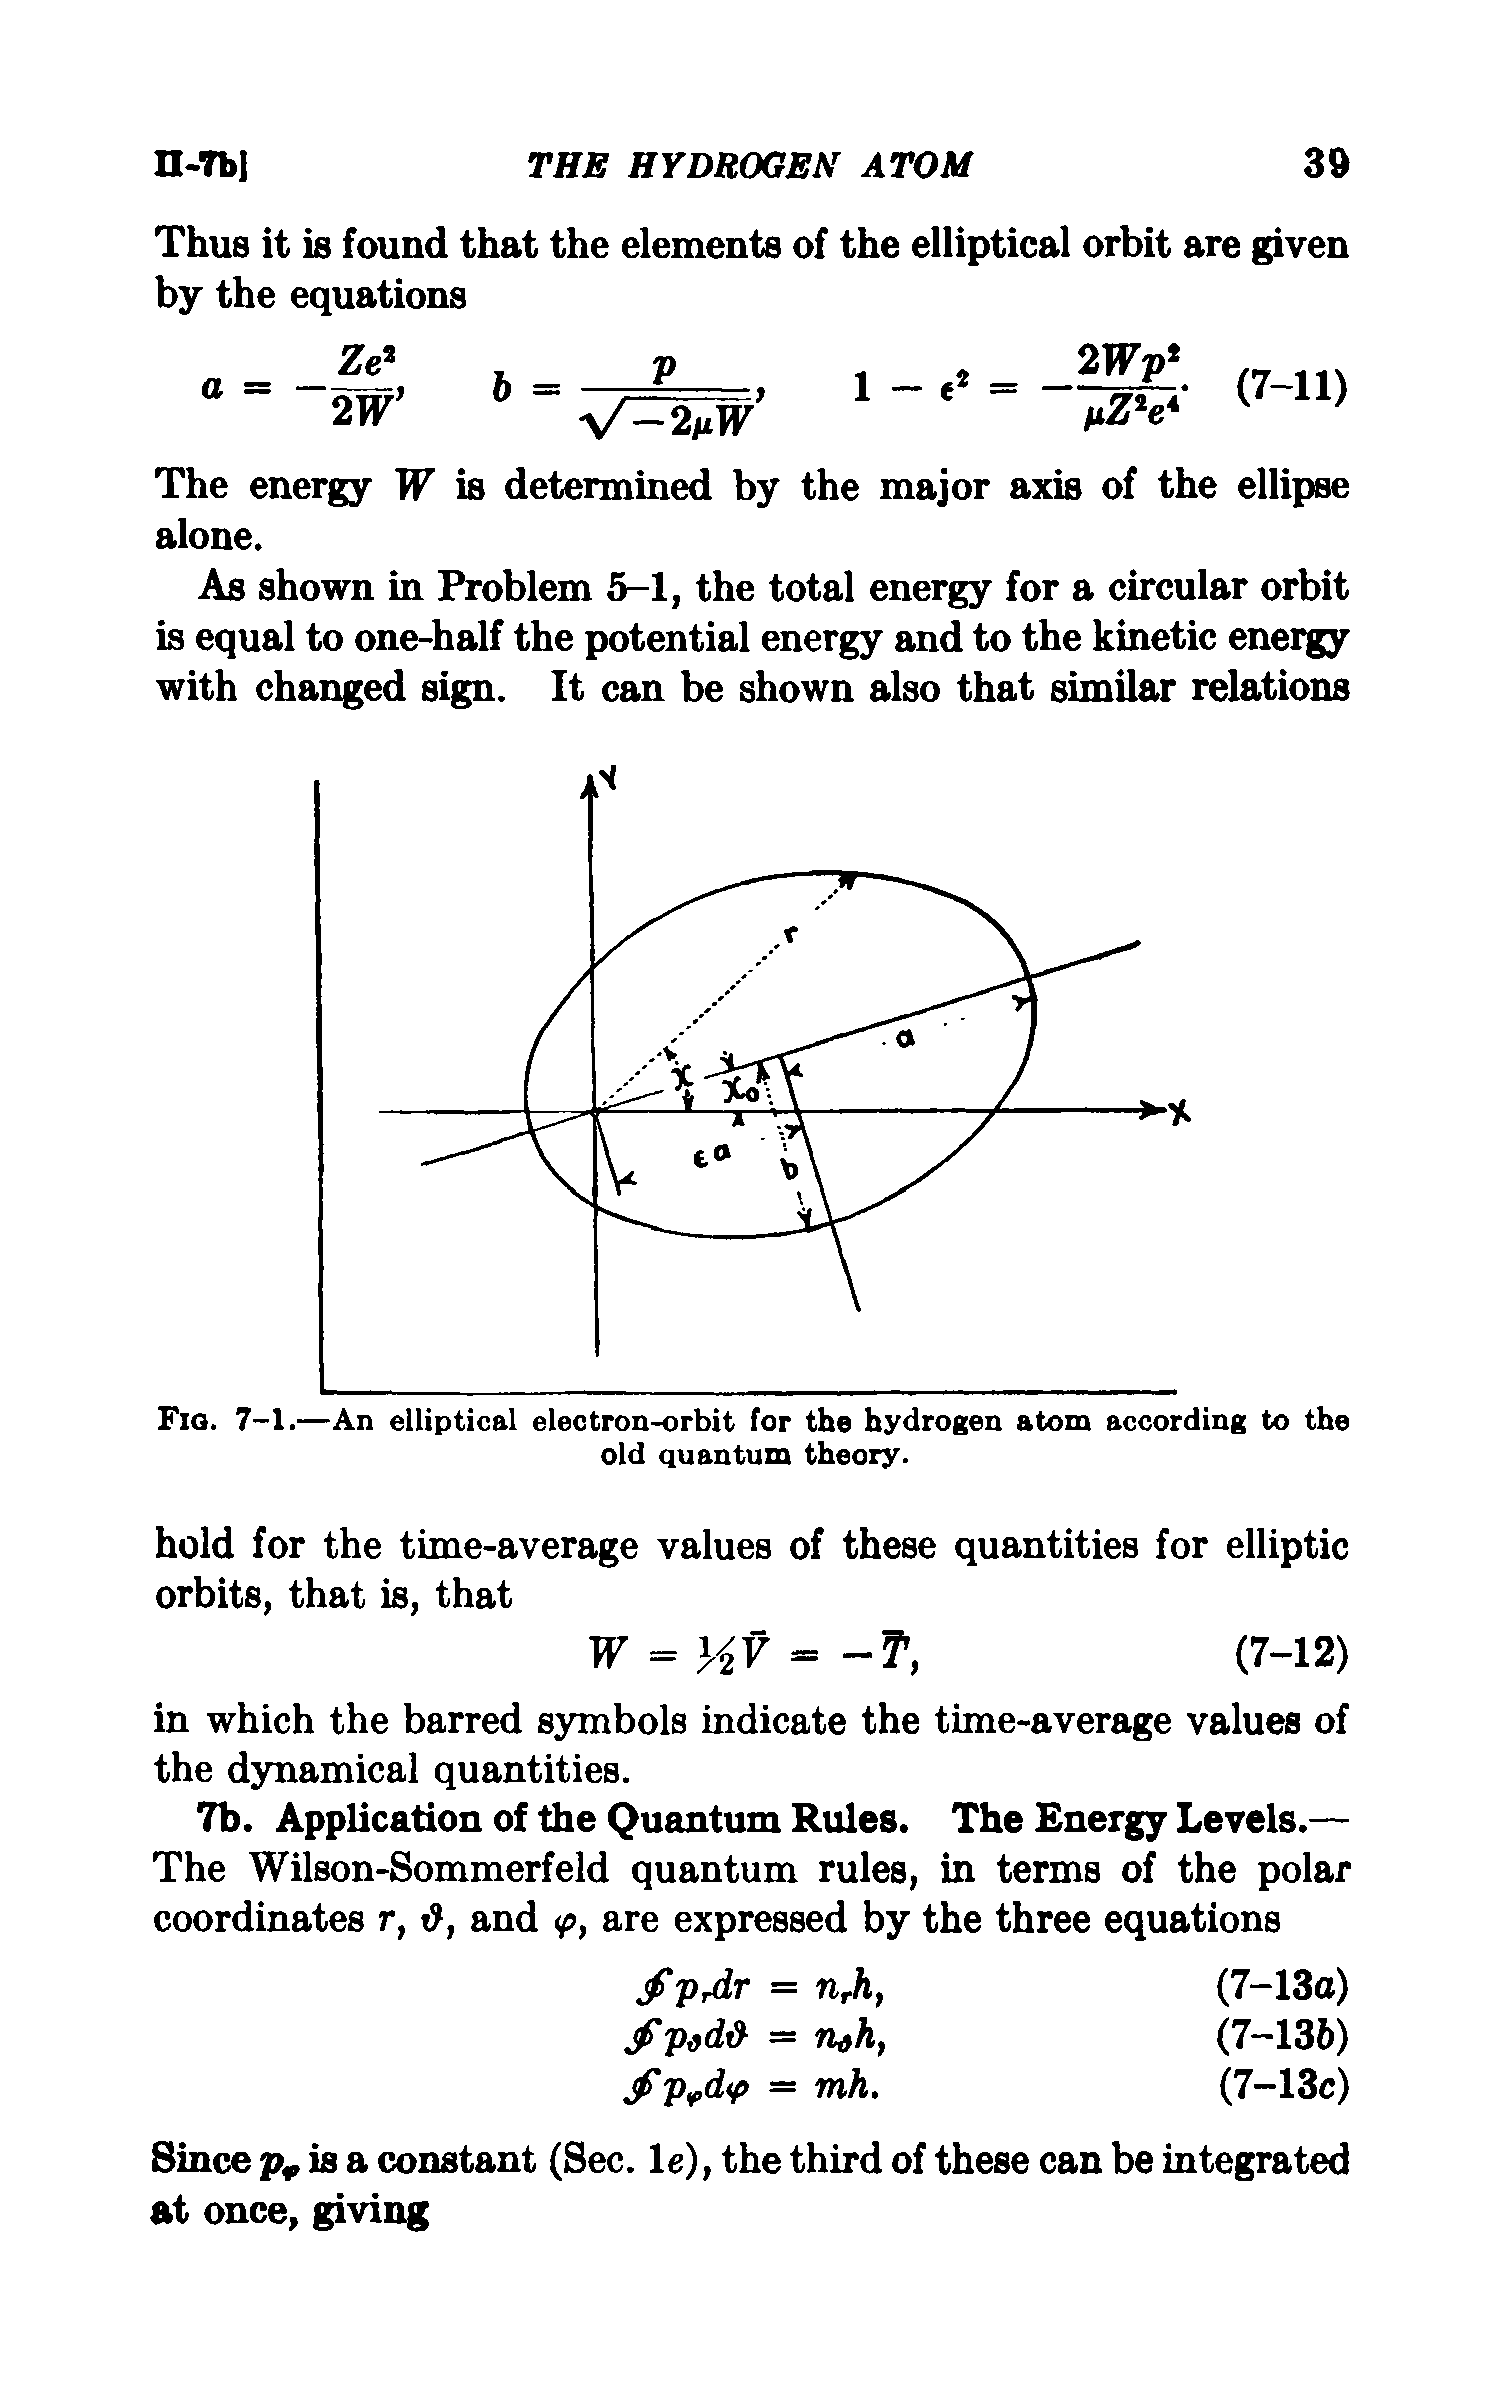 Fig. 7-1.—An elliptical electron-orbit for the hydrogen atom according to the old quantum theory.